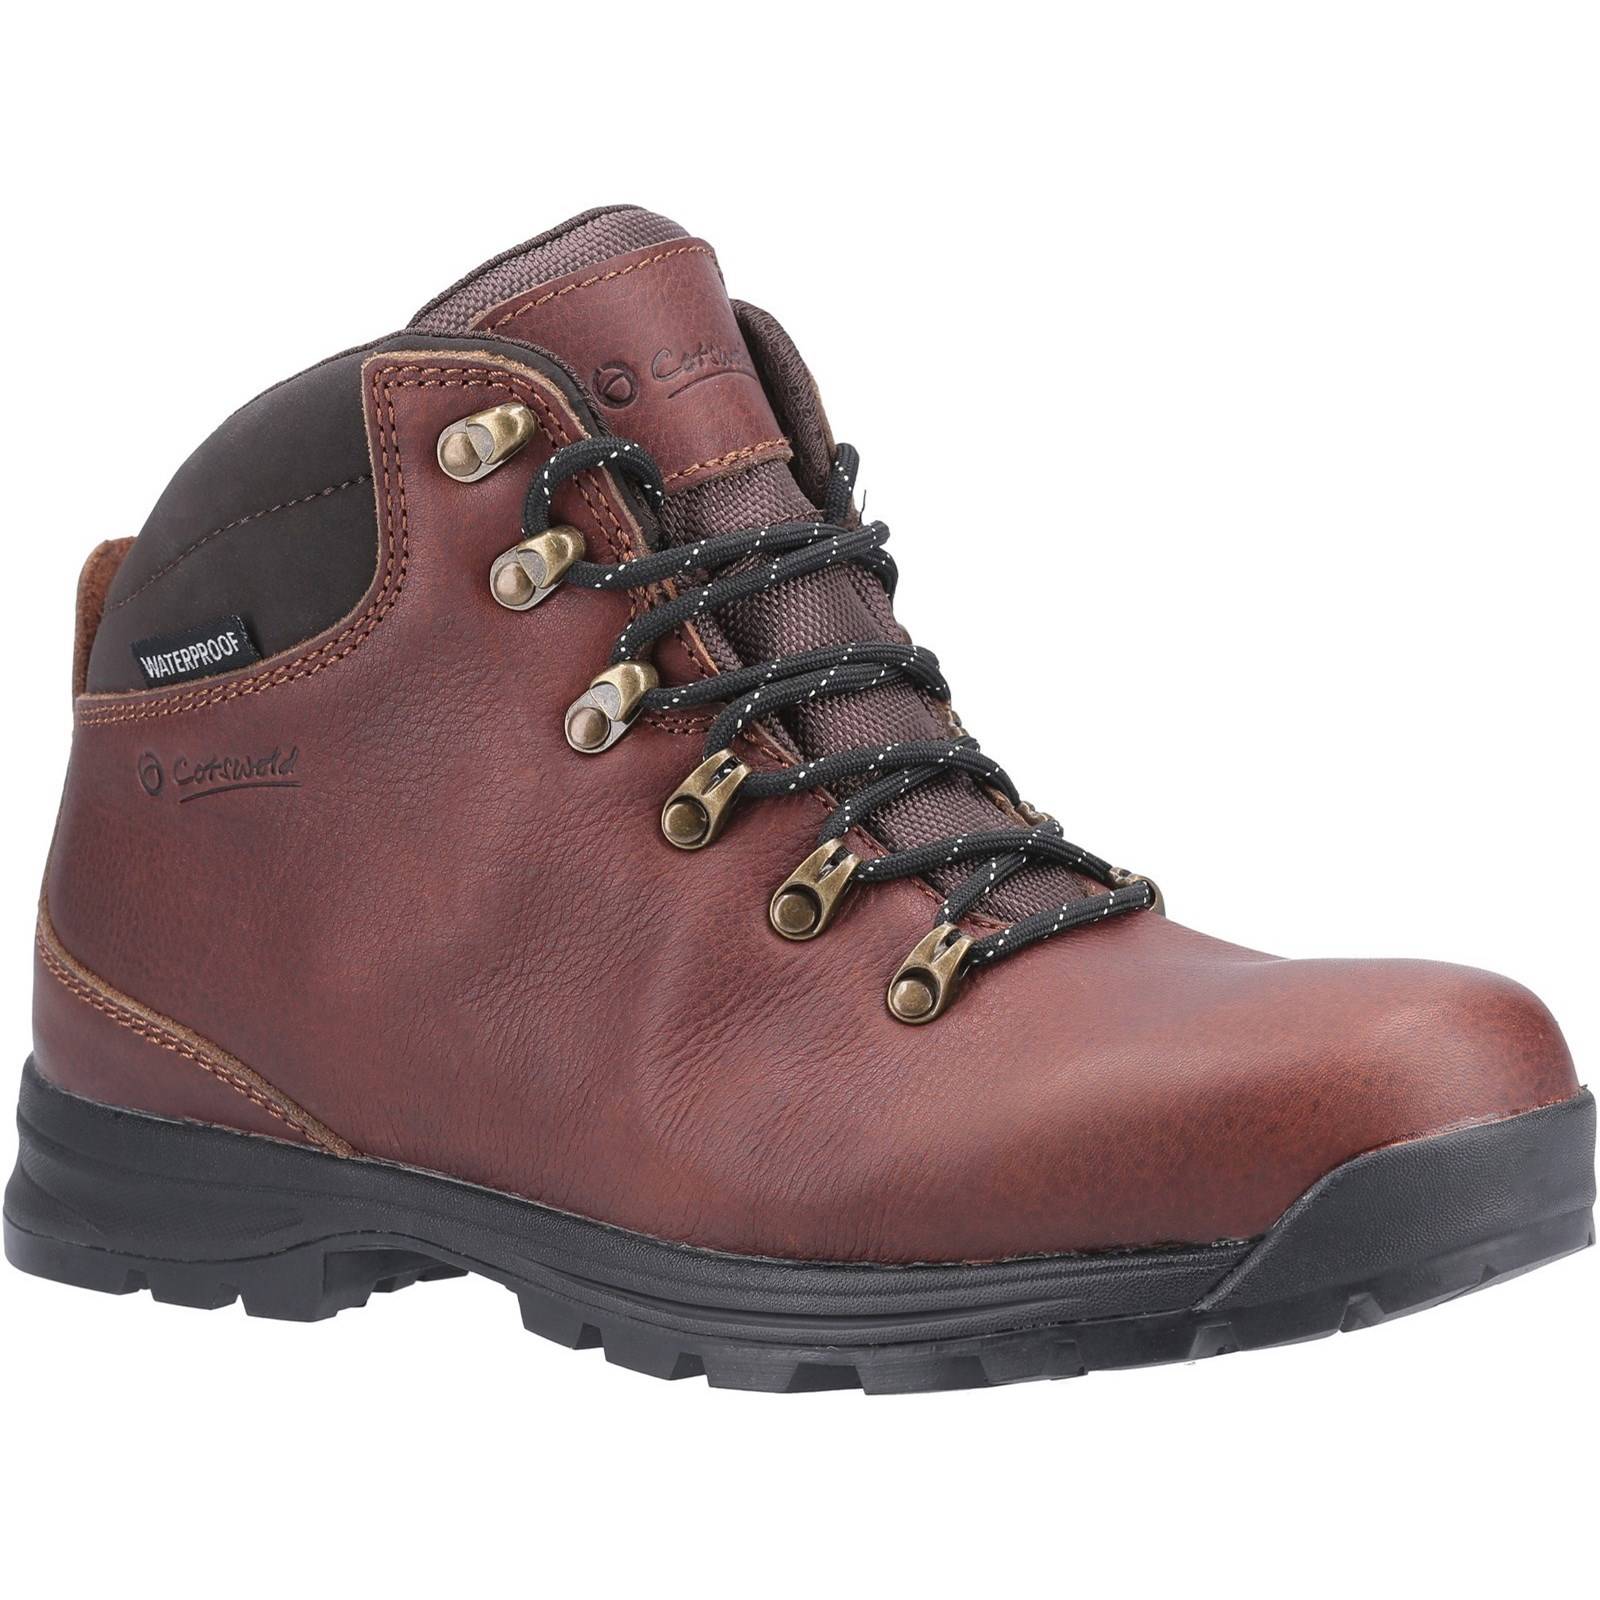 Cotswold Kingsway Lace Up Hiking Boots Brown